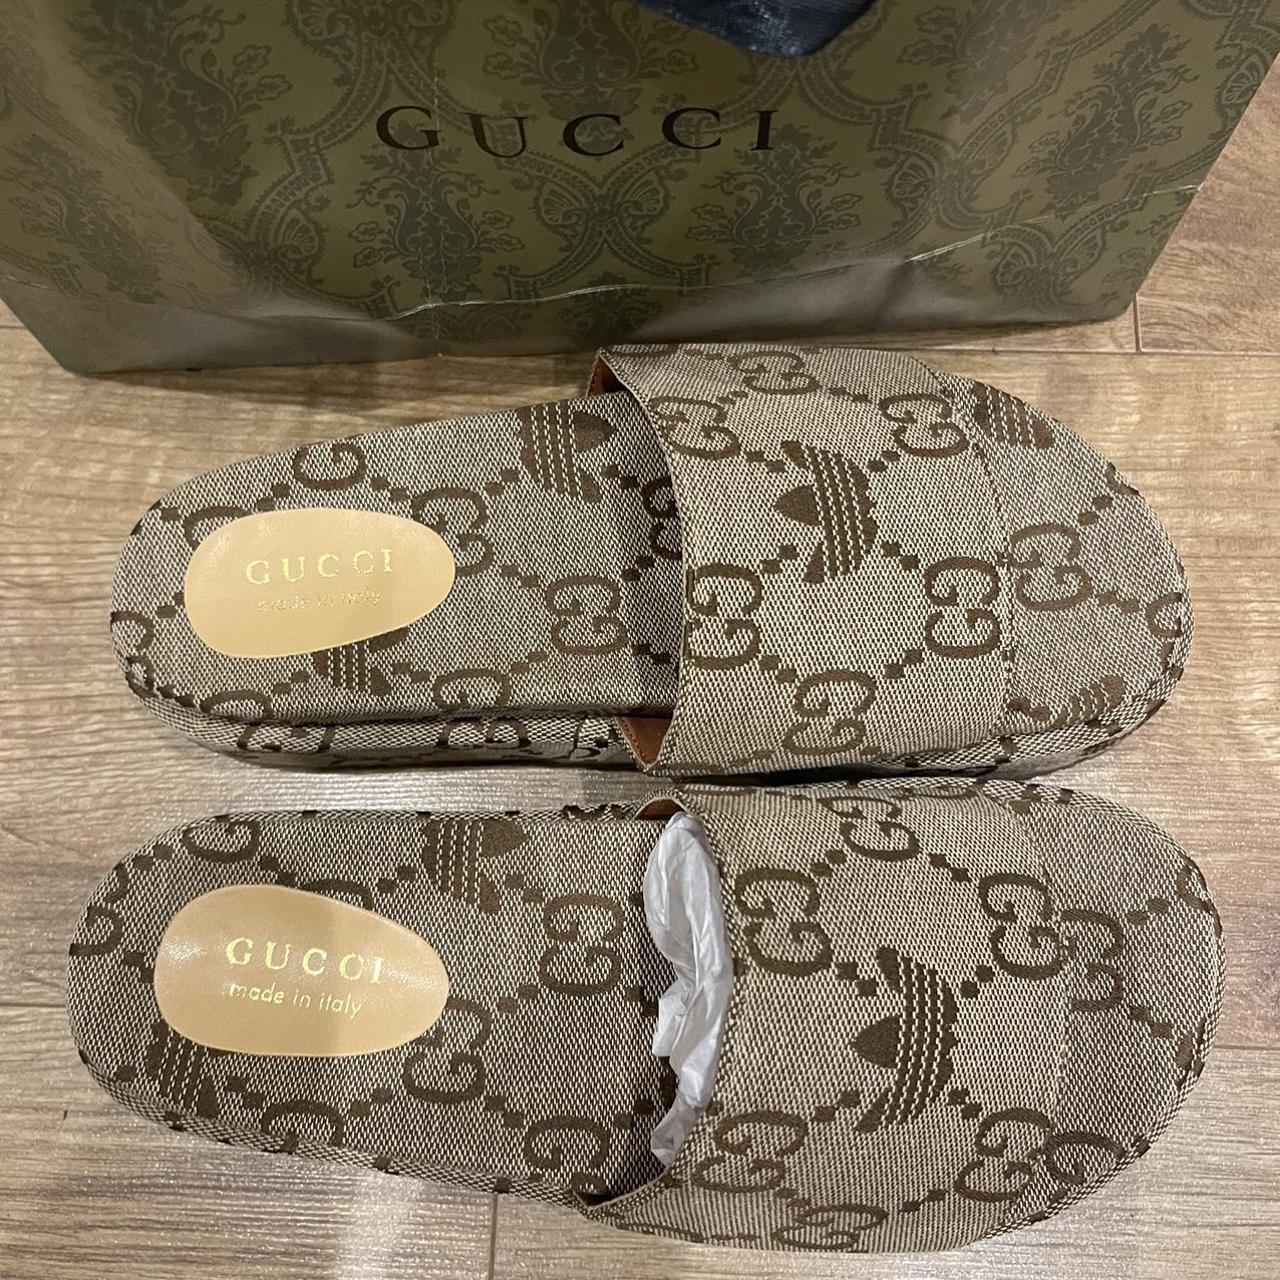 Gucci sandals Perfect for holiday Brand new I just... - Depop